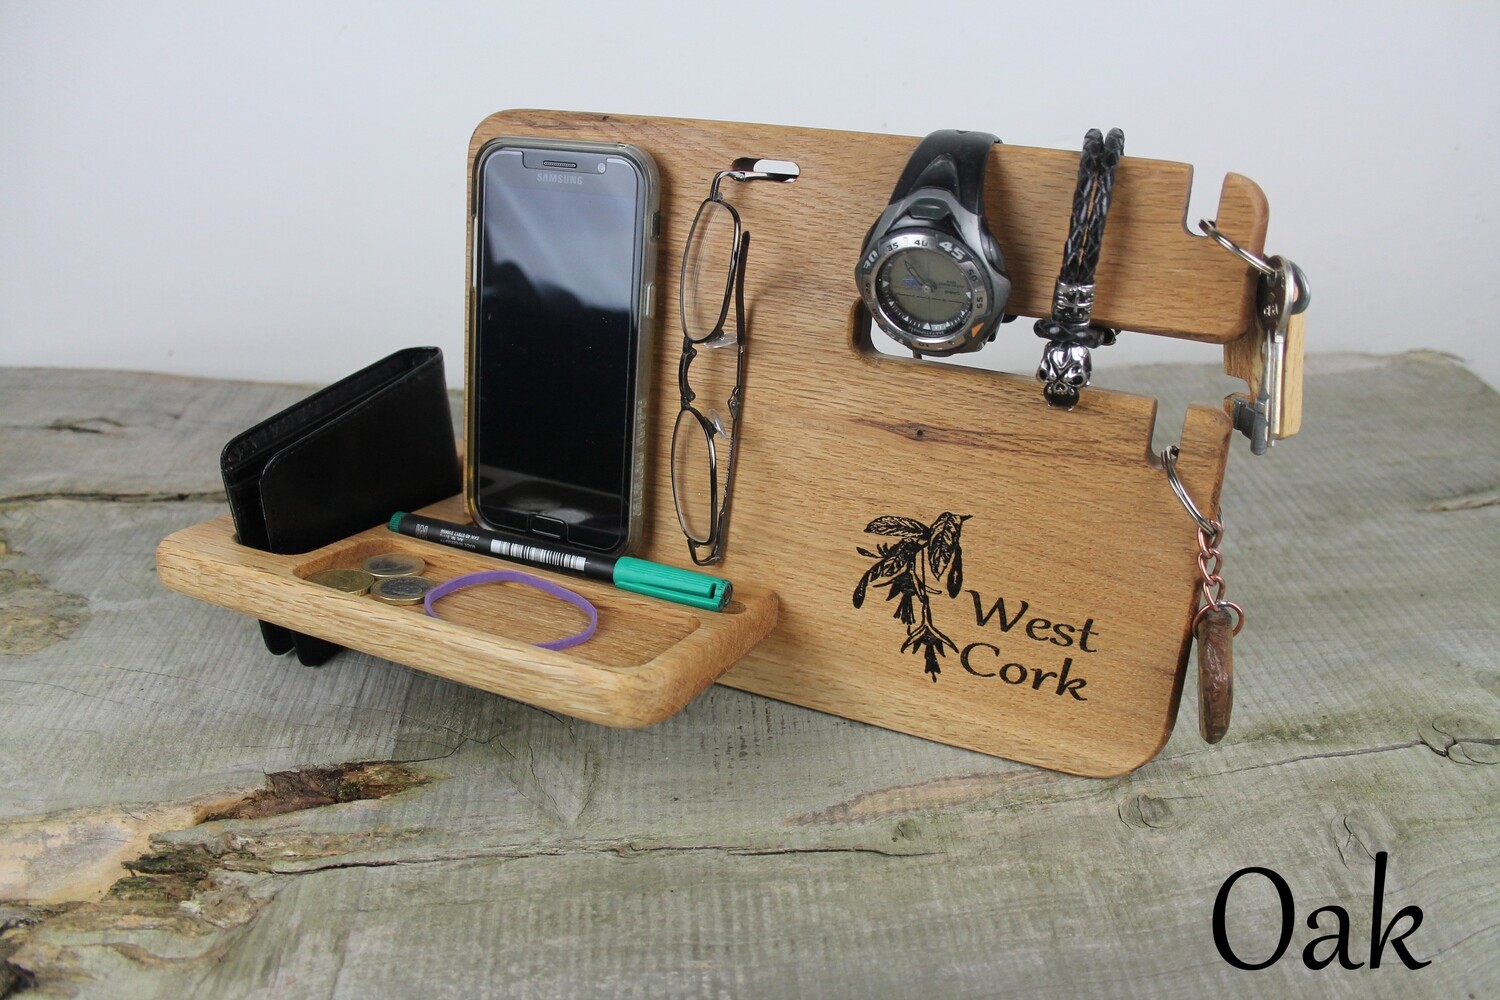 Solid Oak Desk Organizer, Phone Stand, and Charging Station